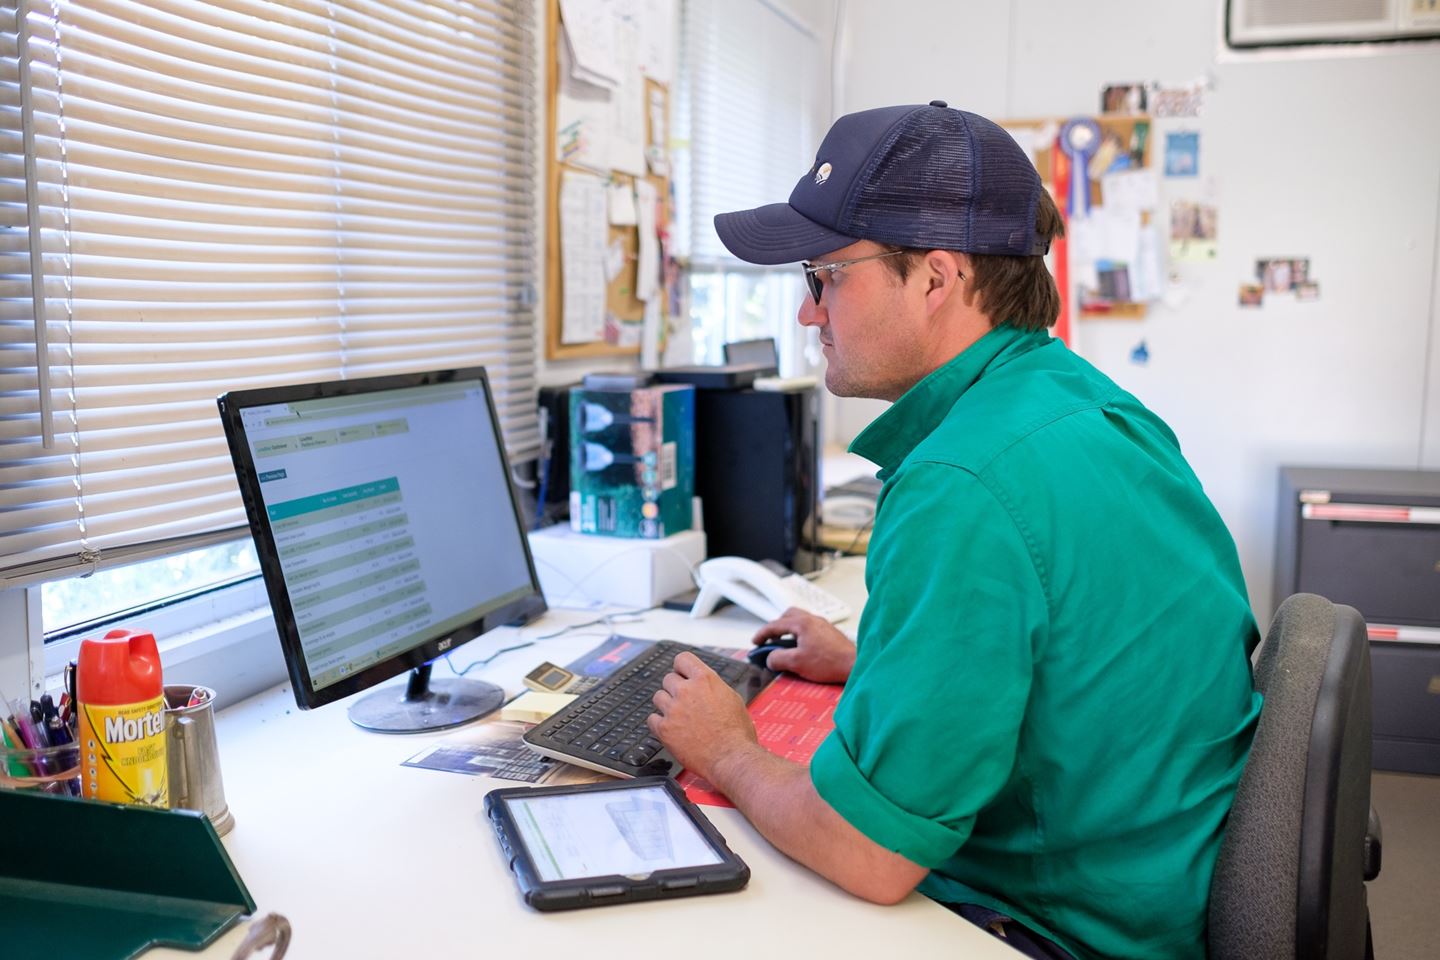 A man in a green shirt and navy cap sits at a computer